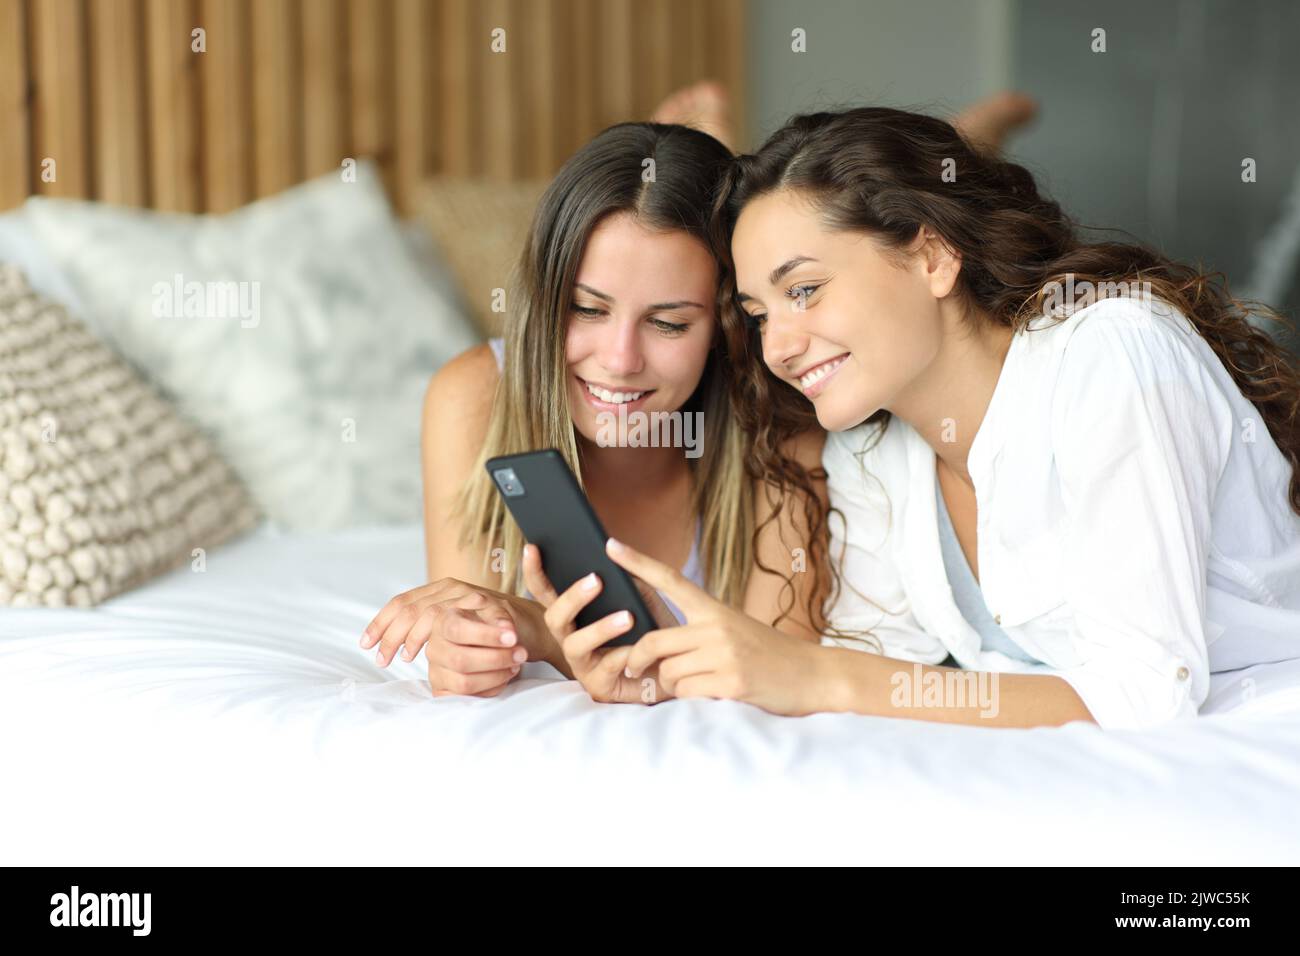 Two happy friends checking smartphone lying on a bed Stock Photo